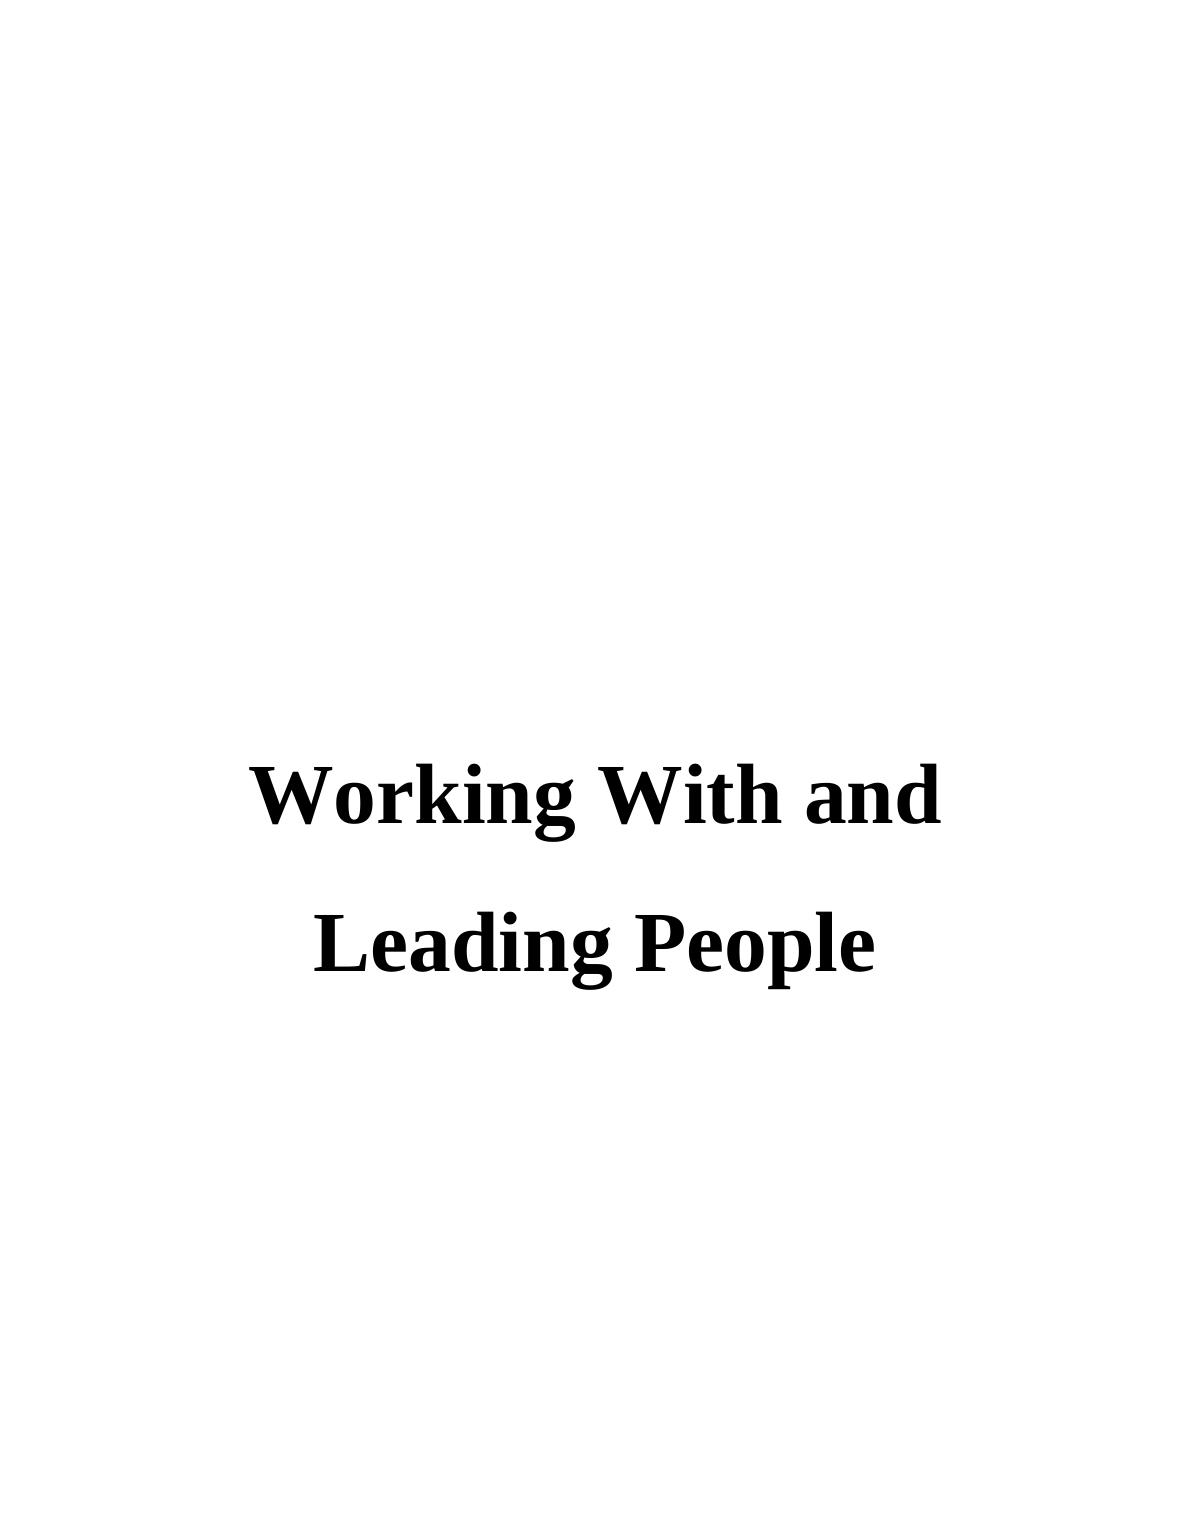 Working With and Leading People PDF_1